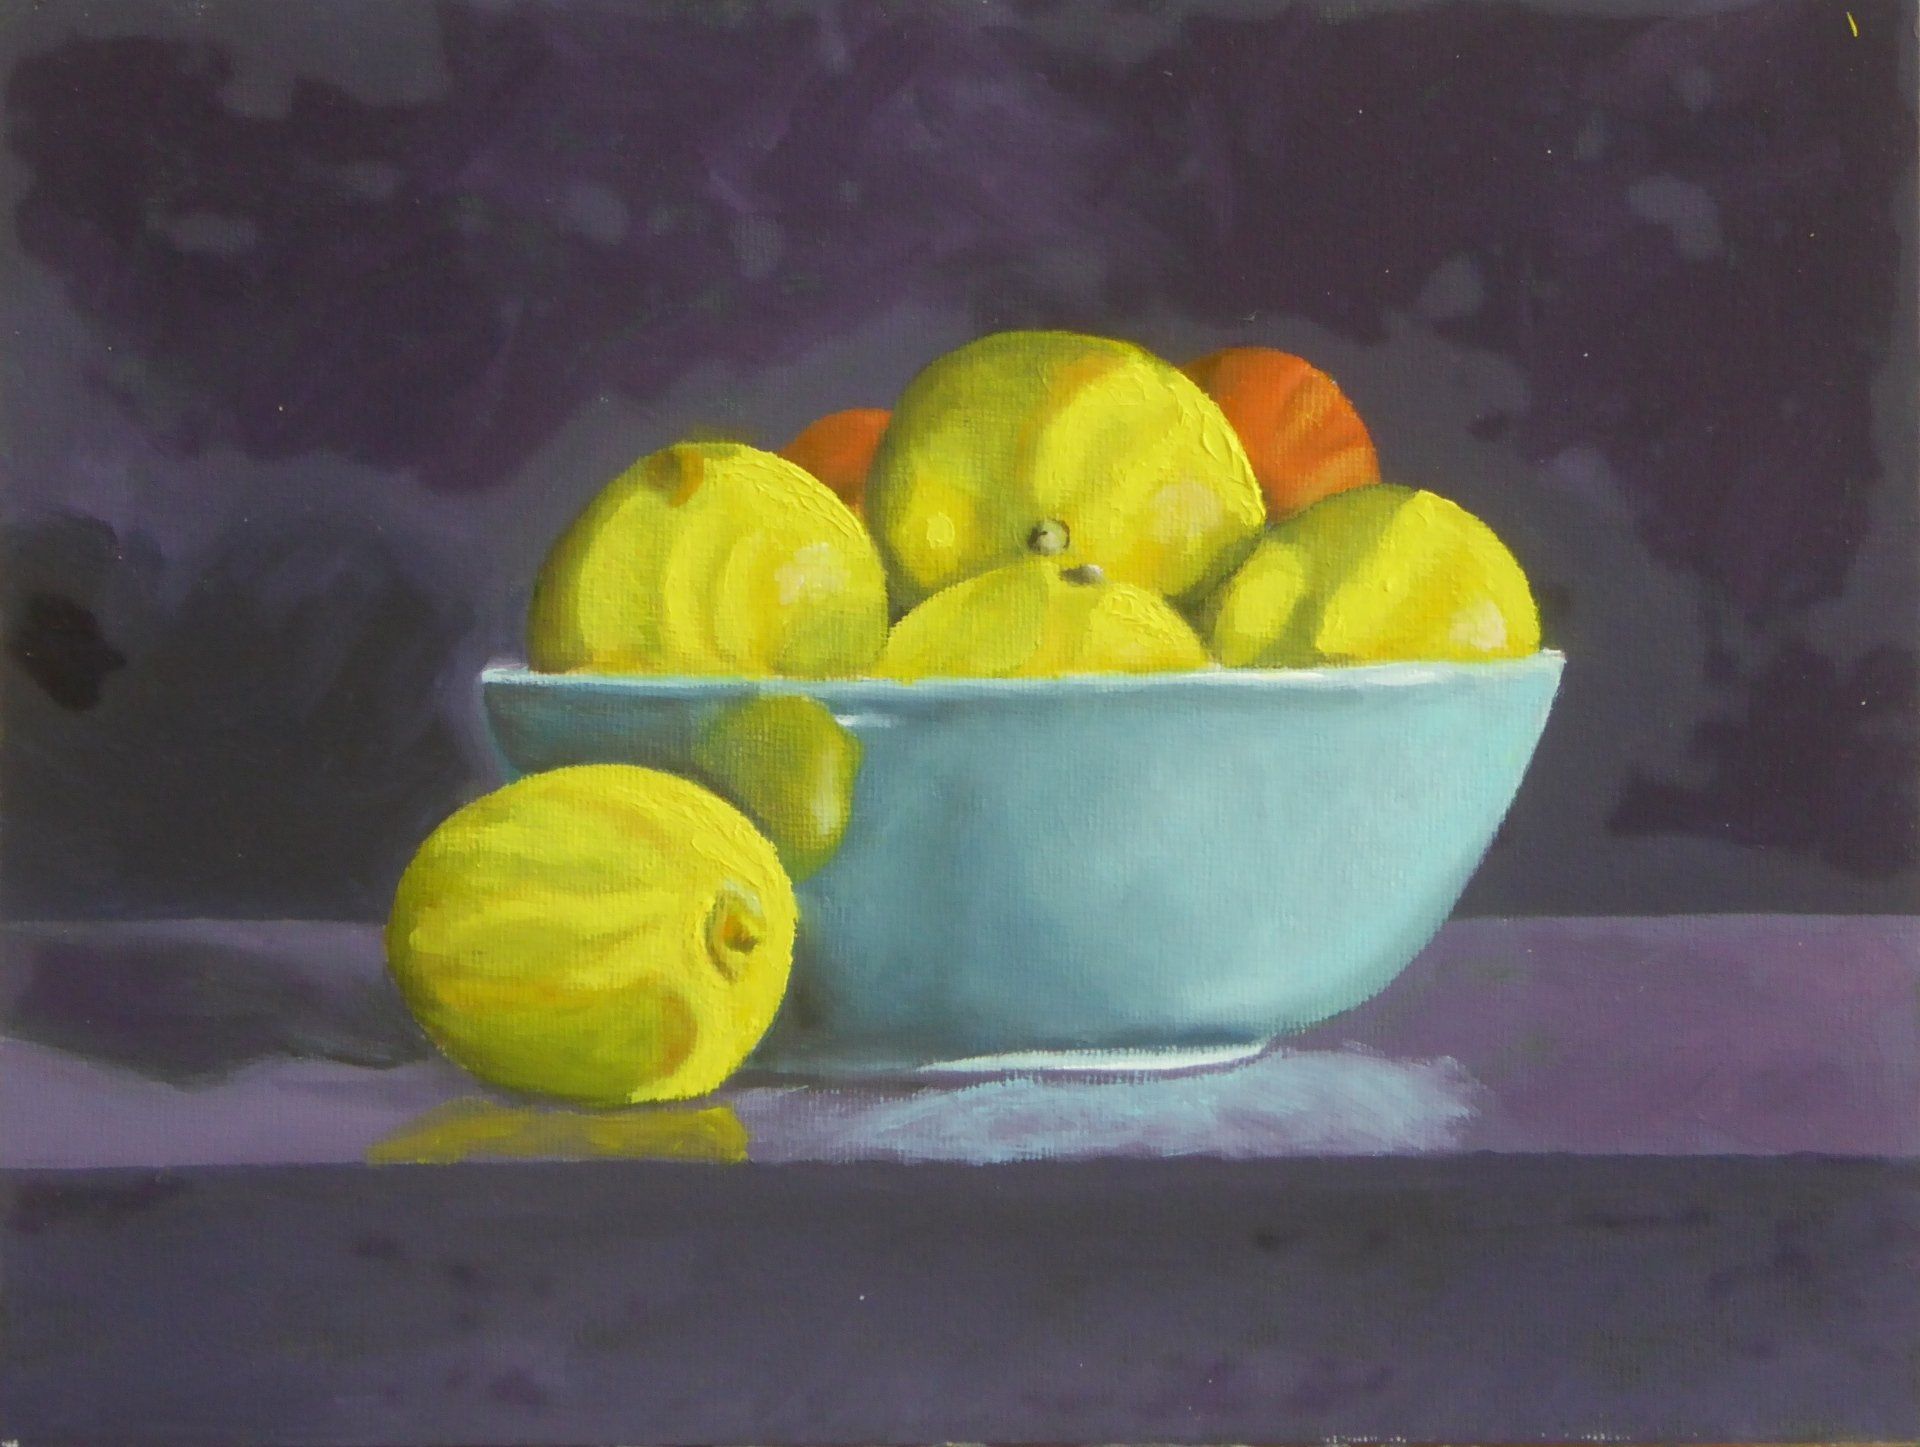 Painting of Lemons and Oranges in a blue bowl